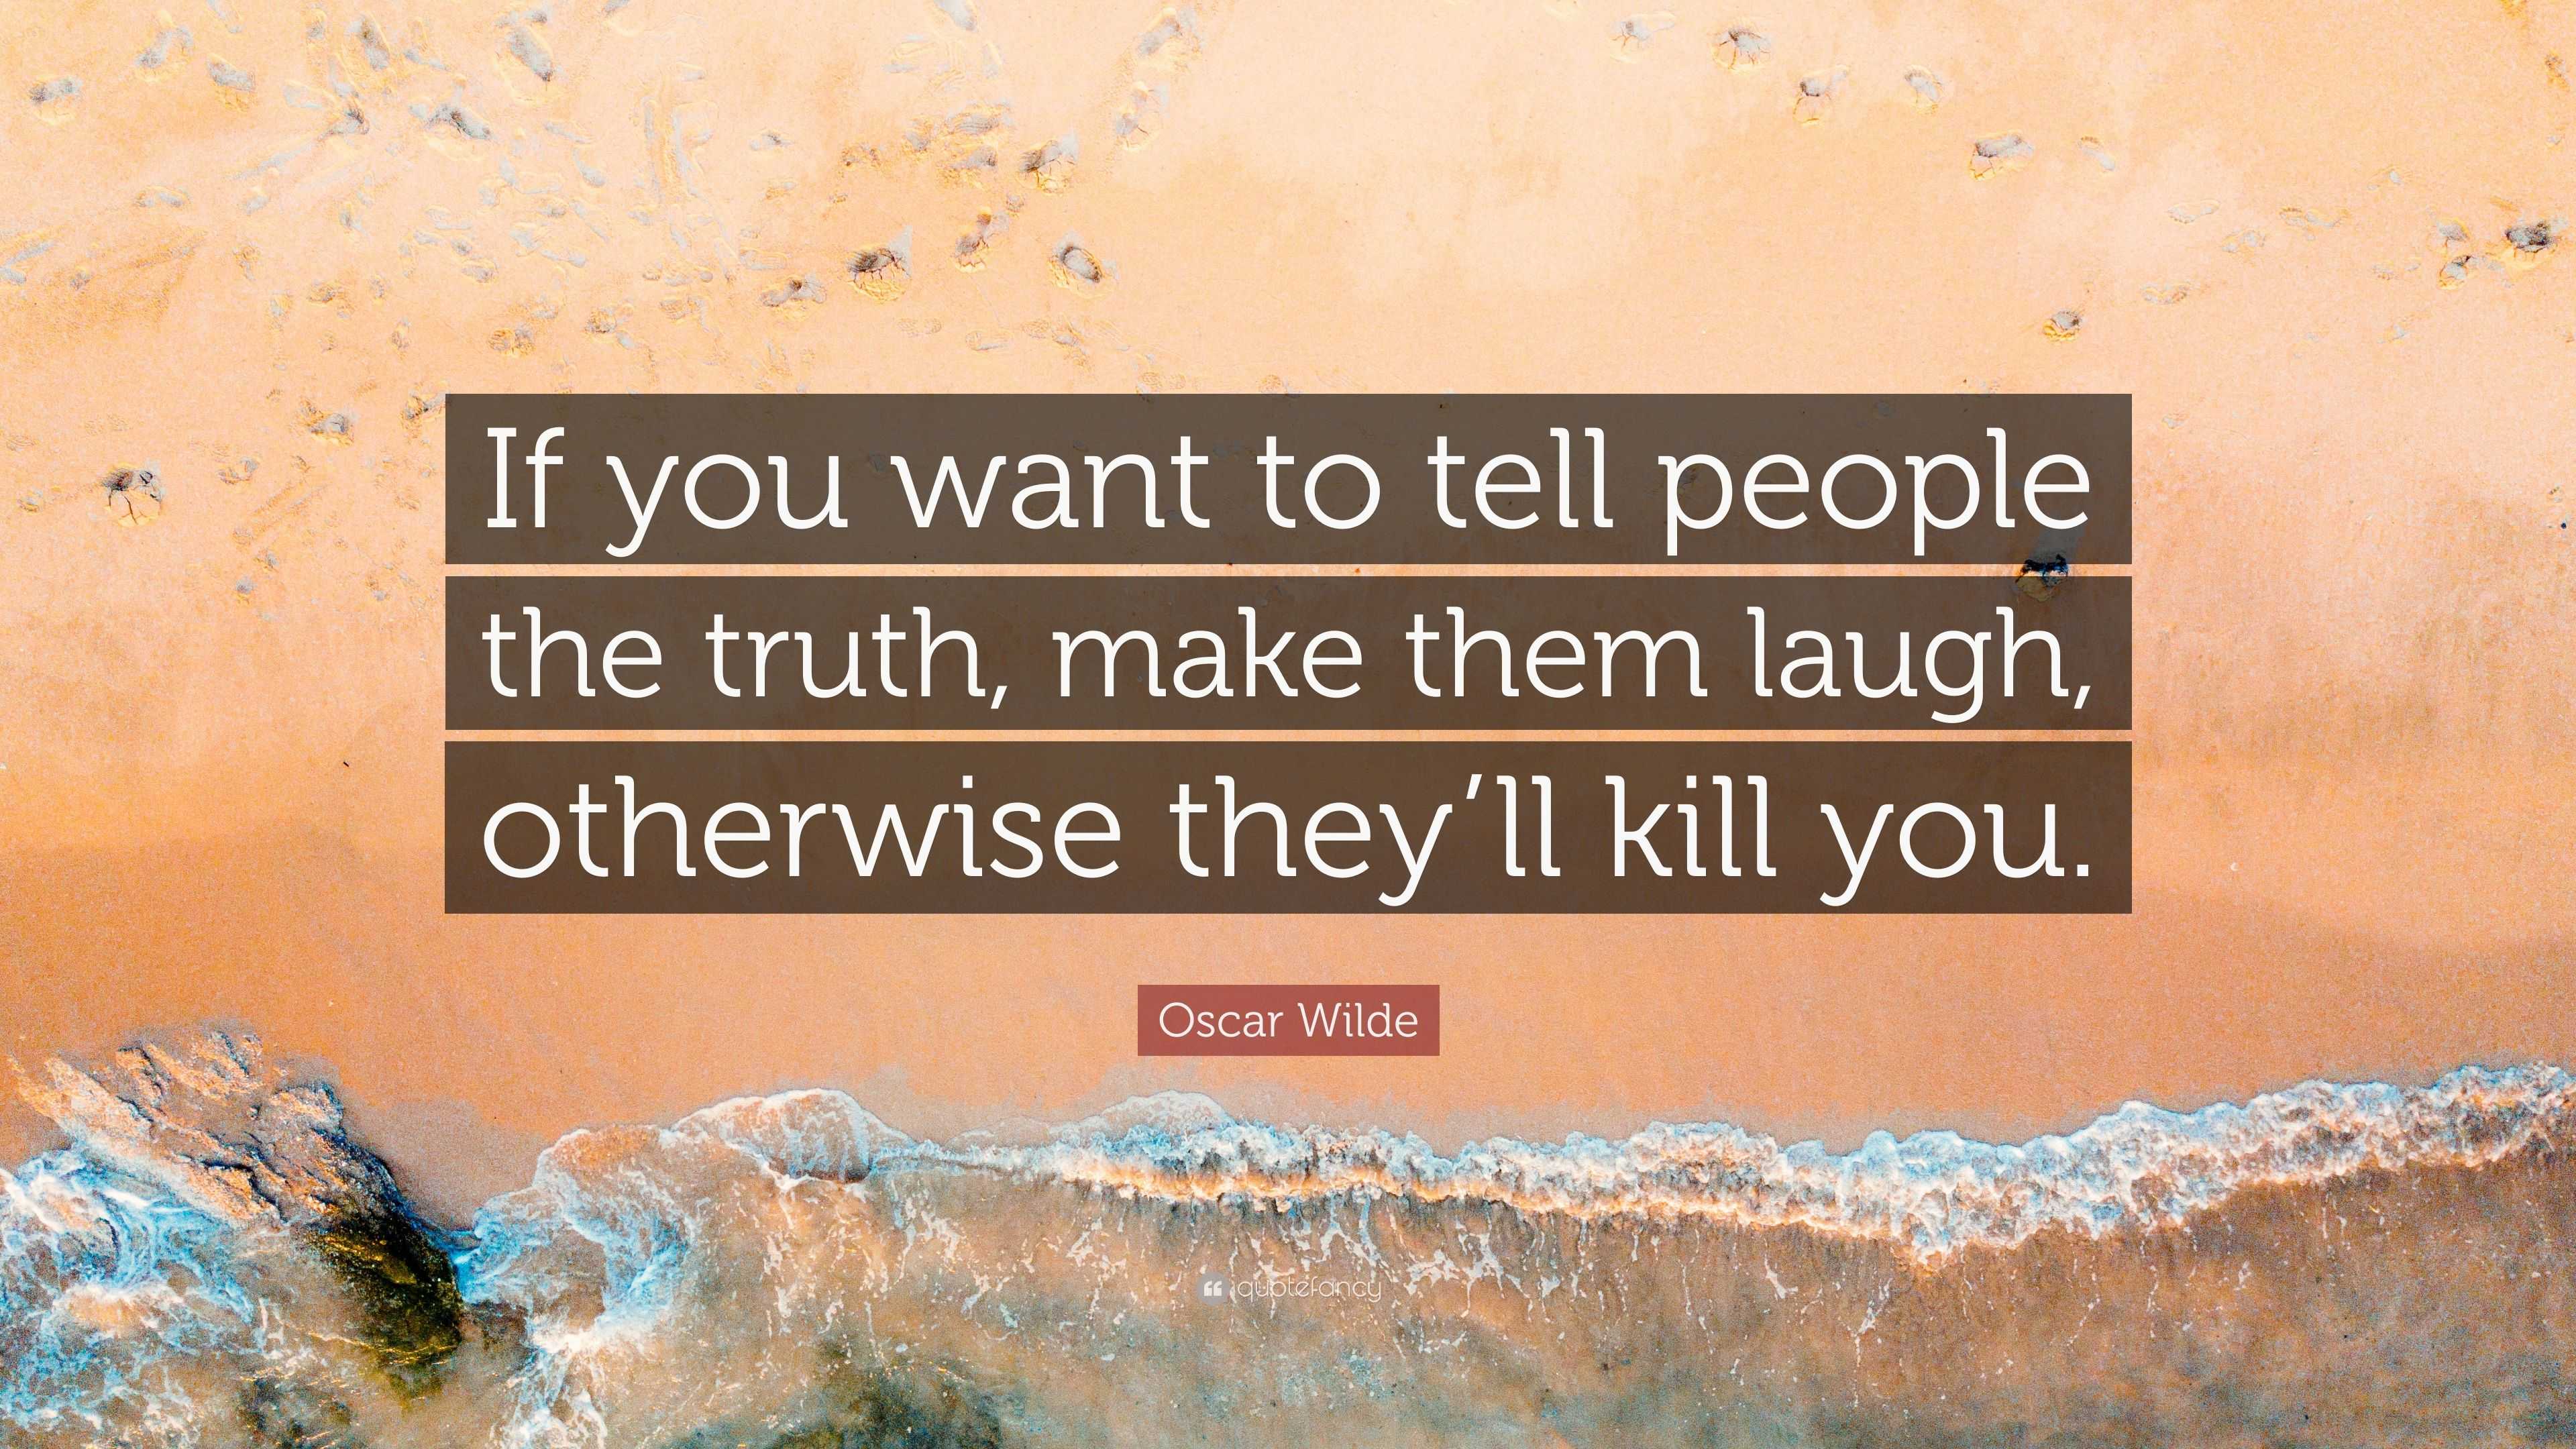 Oscar Wilde Quote “if You Want To Tell People The Truth Make Them